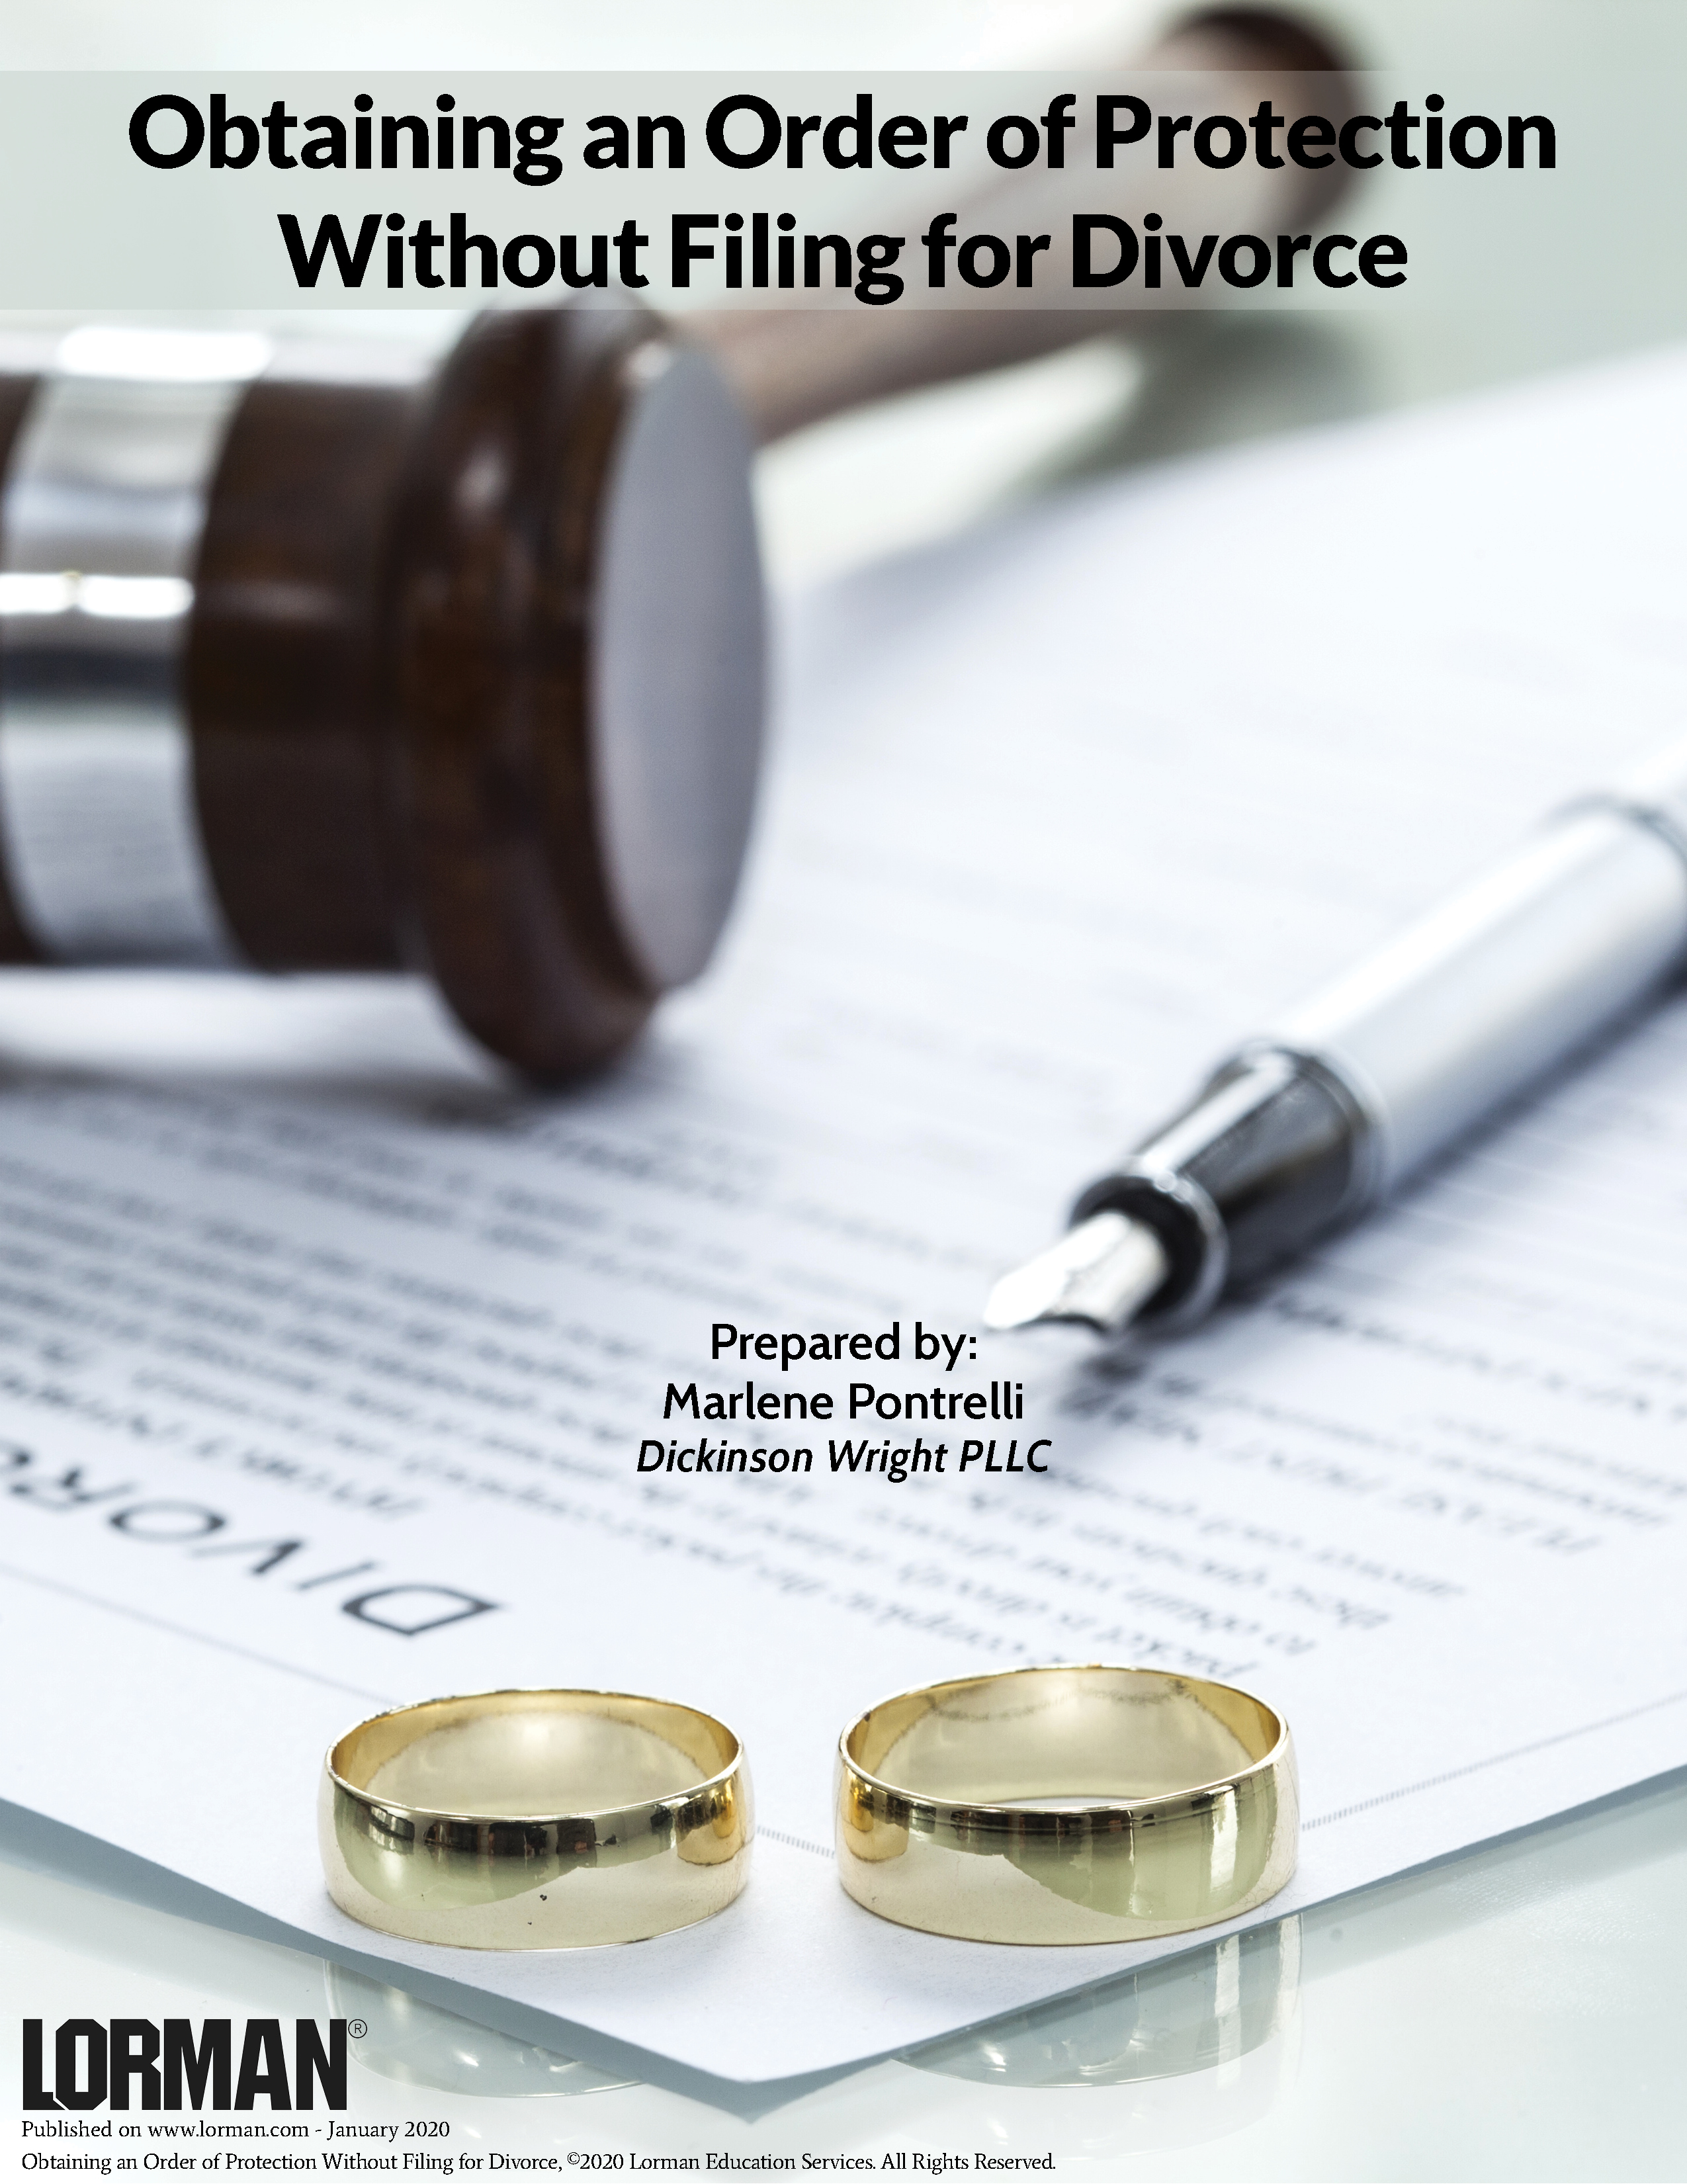 Obtaining an Order of Protection Without Filing for Divorce